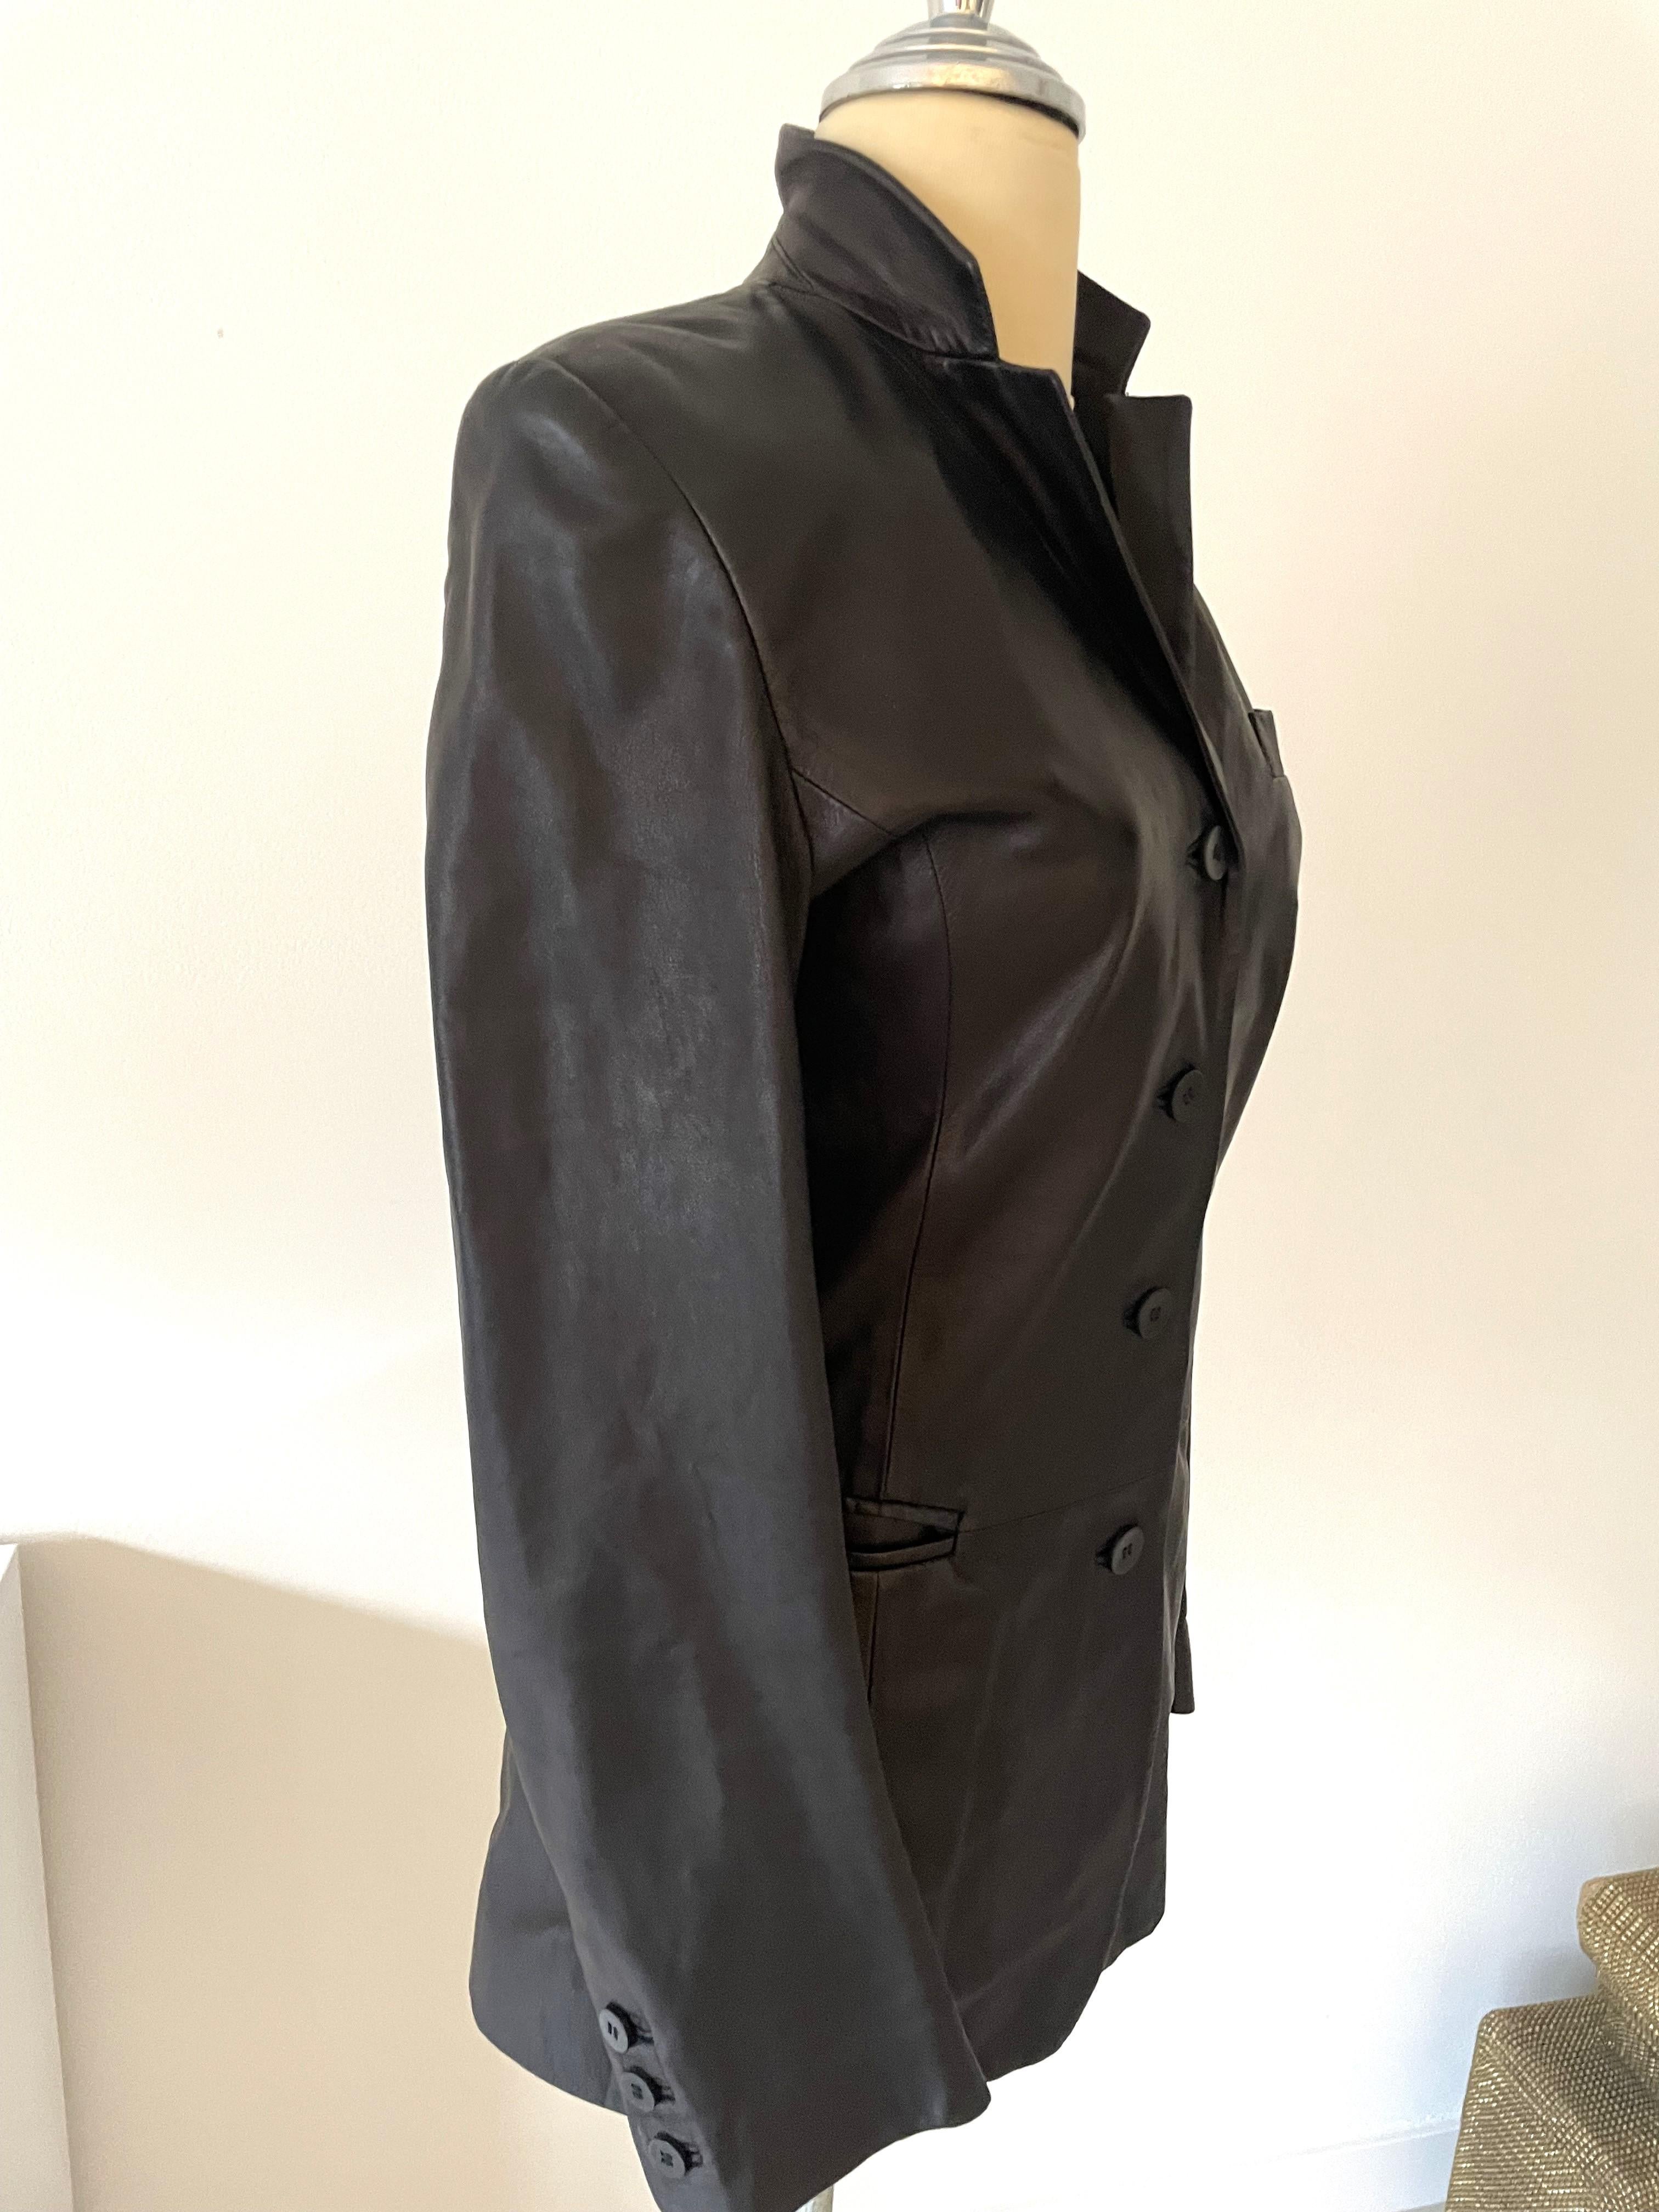 Timeless and classy this vintage 90s Trussardi Black Soft Leather Blazer. Trussardi is an Italian fashion brand known for its luxury goods, including clothing, accessories, and leather products. They are recognized for their high-quality materials